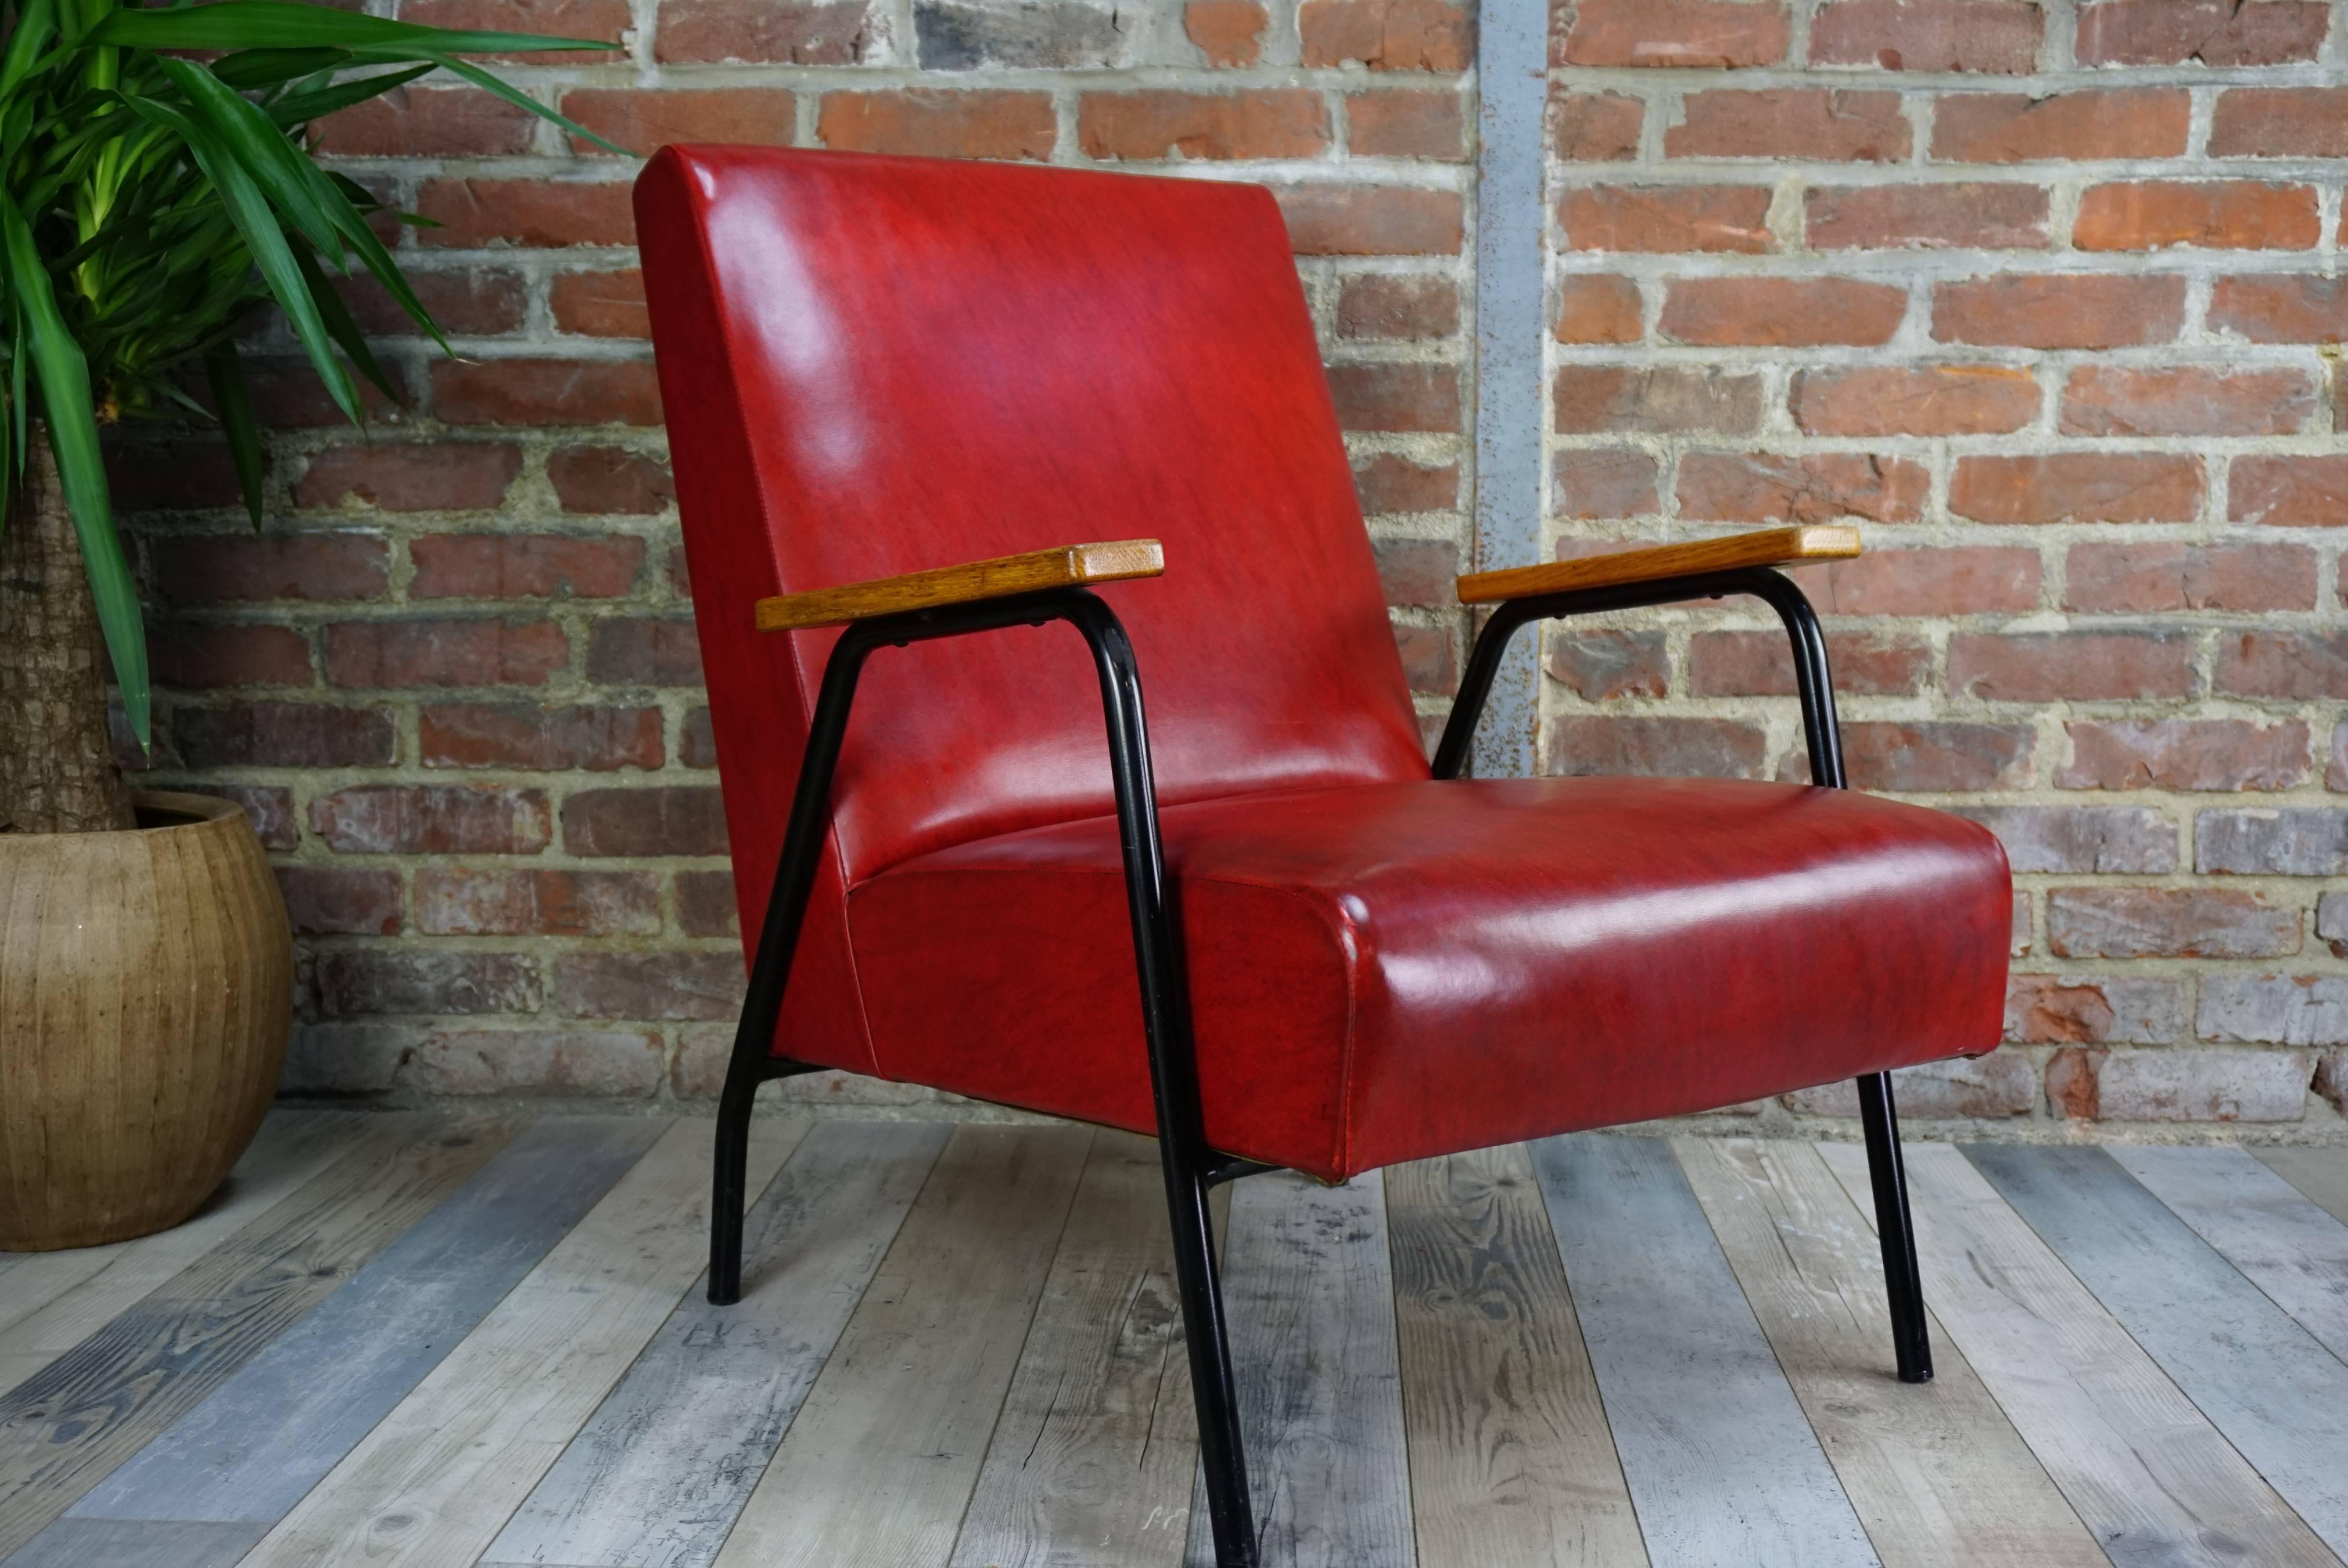 French design armchair 1950s work by Pierre Guariche for Meurop. This armchair is made of black metal and a shell (lounge seat with a height of 38cm on the floor) dressed in red, with wooden armrests. All original and in a very good state of